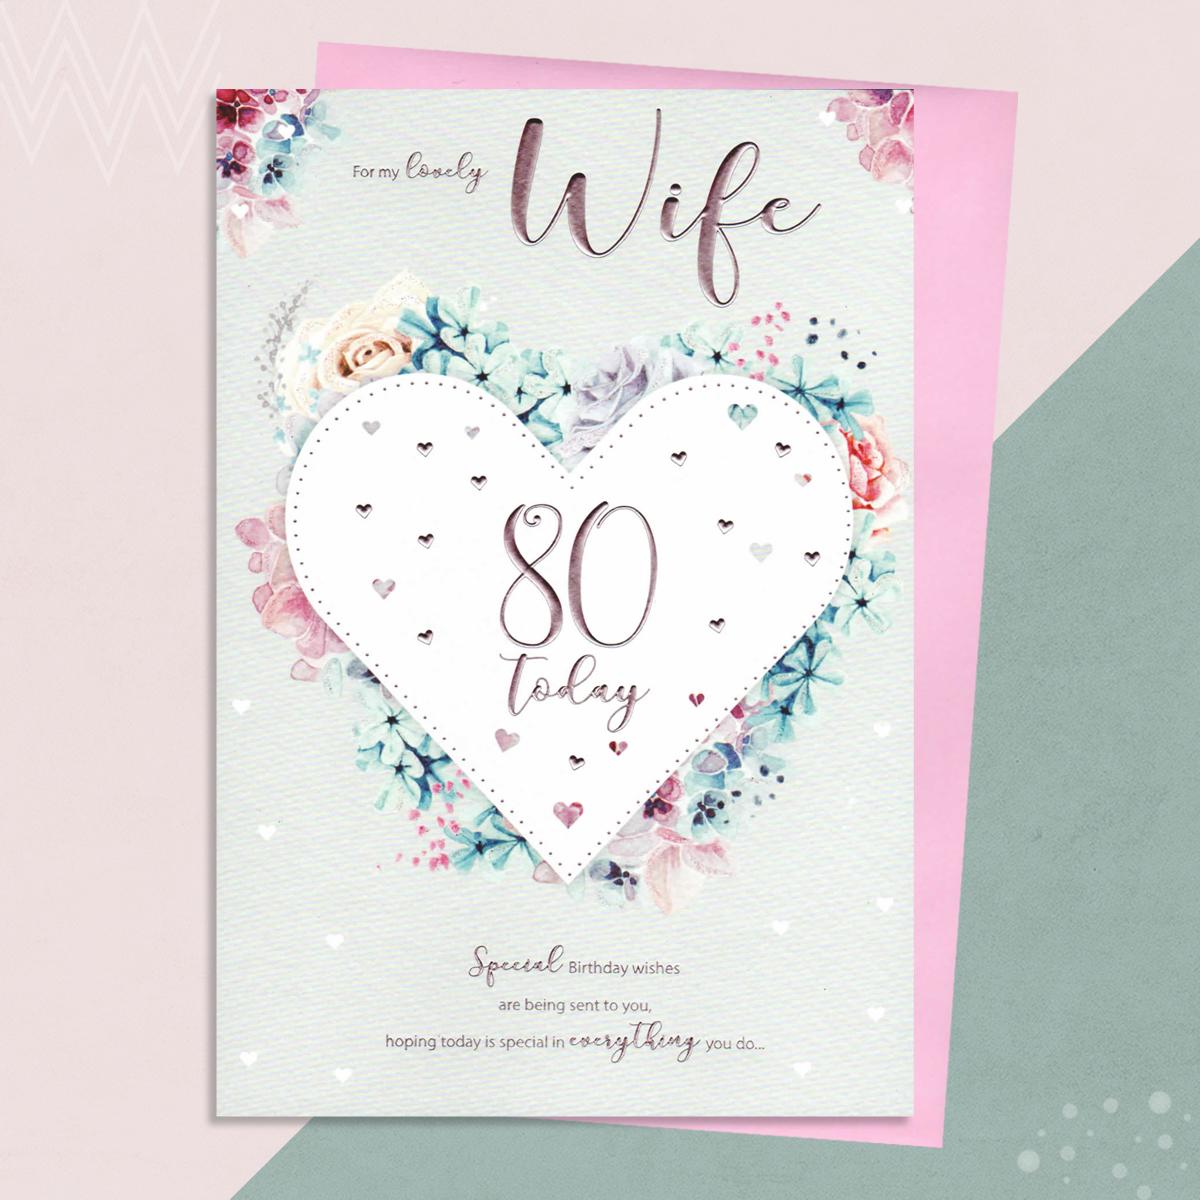 Wife Age 80 Birthday Card Alongside Its Pink Envelope